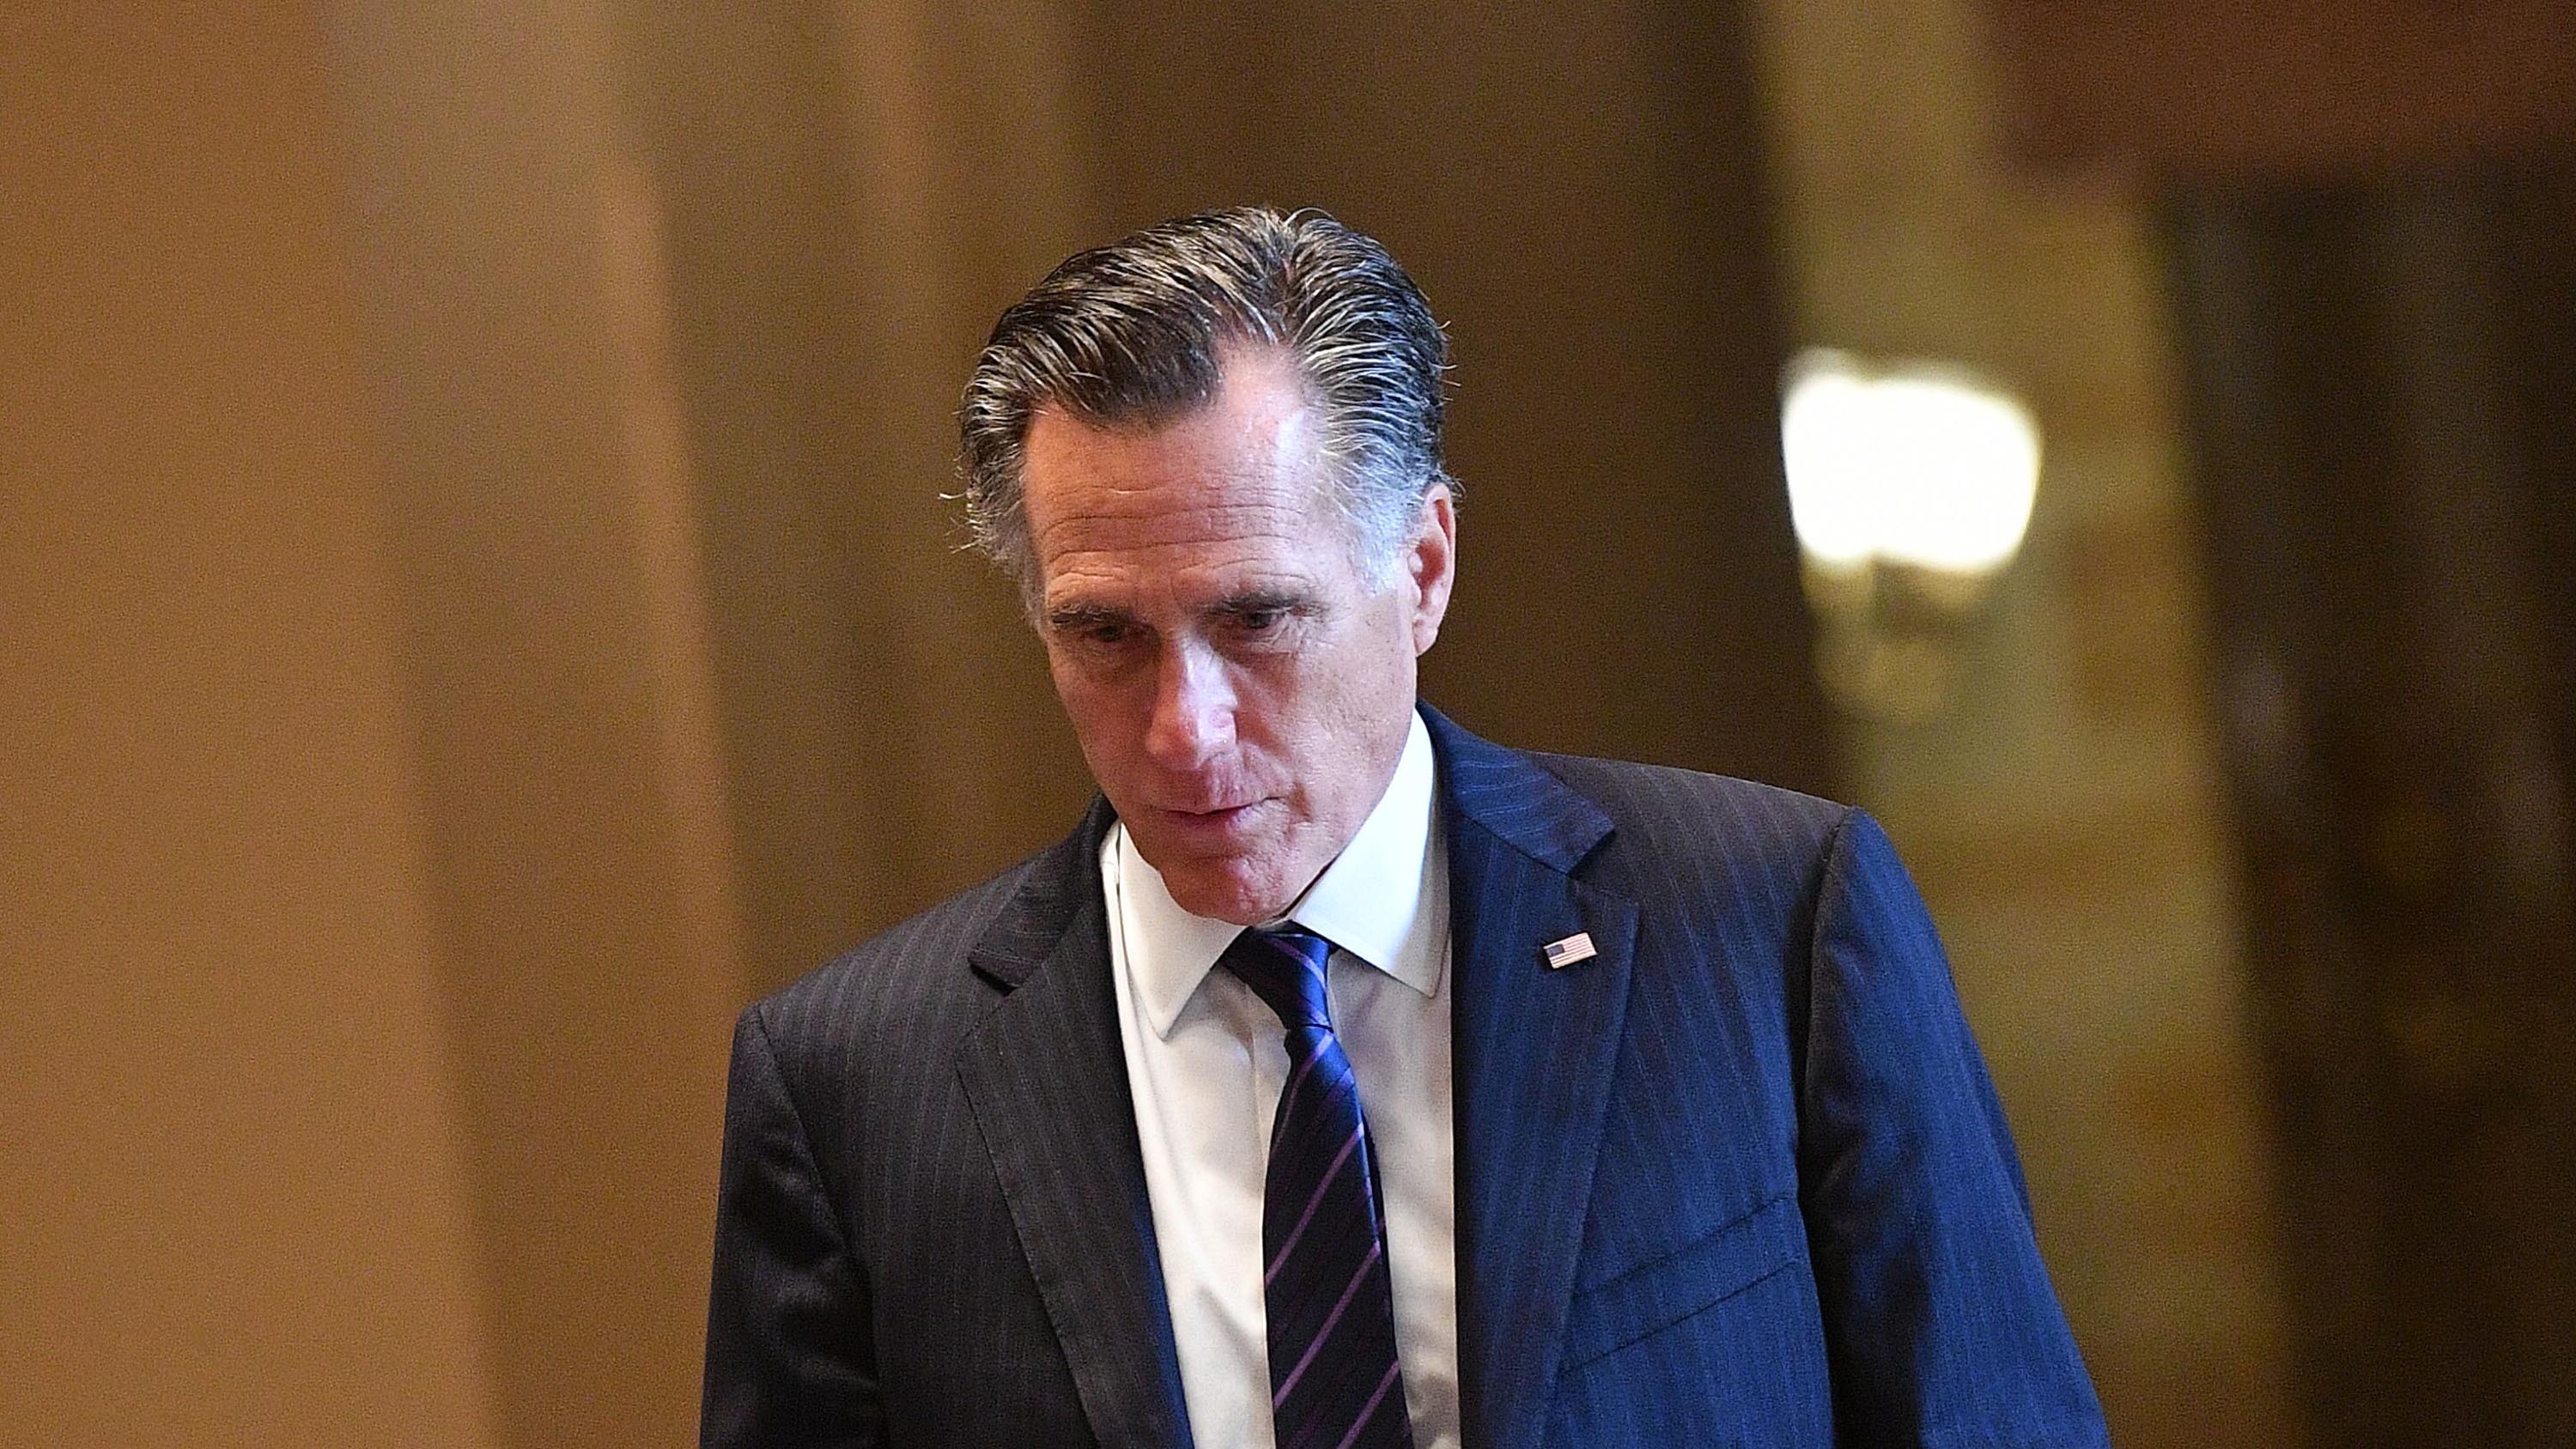 US Senator Mitt Romney (R-UT) returns from a recess during the impeachment trial proceedings of US President Donald Trump on Capitol Hill January 30, 2020, in Washington, DC. - The fight over calling witnesses to testify in President Donald Trump's impeachment trial intensified January 28, 2020 after Trump's lawyers closed their defense calling the abuse of power charges against him politically motivated. Democrats sought to have the Senate subpoena former White House national security advisor John Bolton to provide evidence after leaks from his forthcoming book suggested he could supply damning evidence against Trump. . (Photo by Mandel NGAN / AFP) (Photo by MANDEL NGAN/AFP via Getty Images)